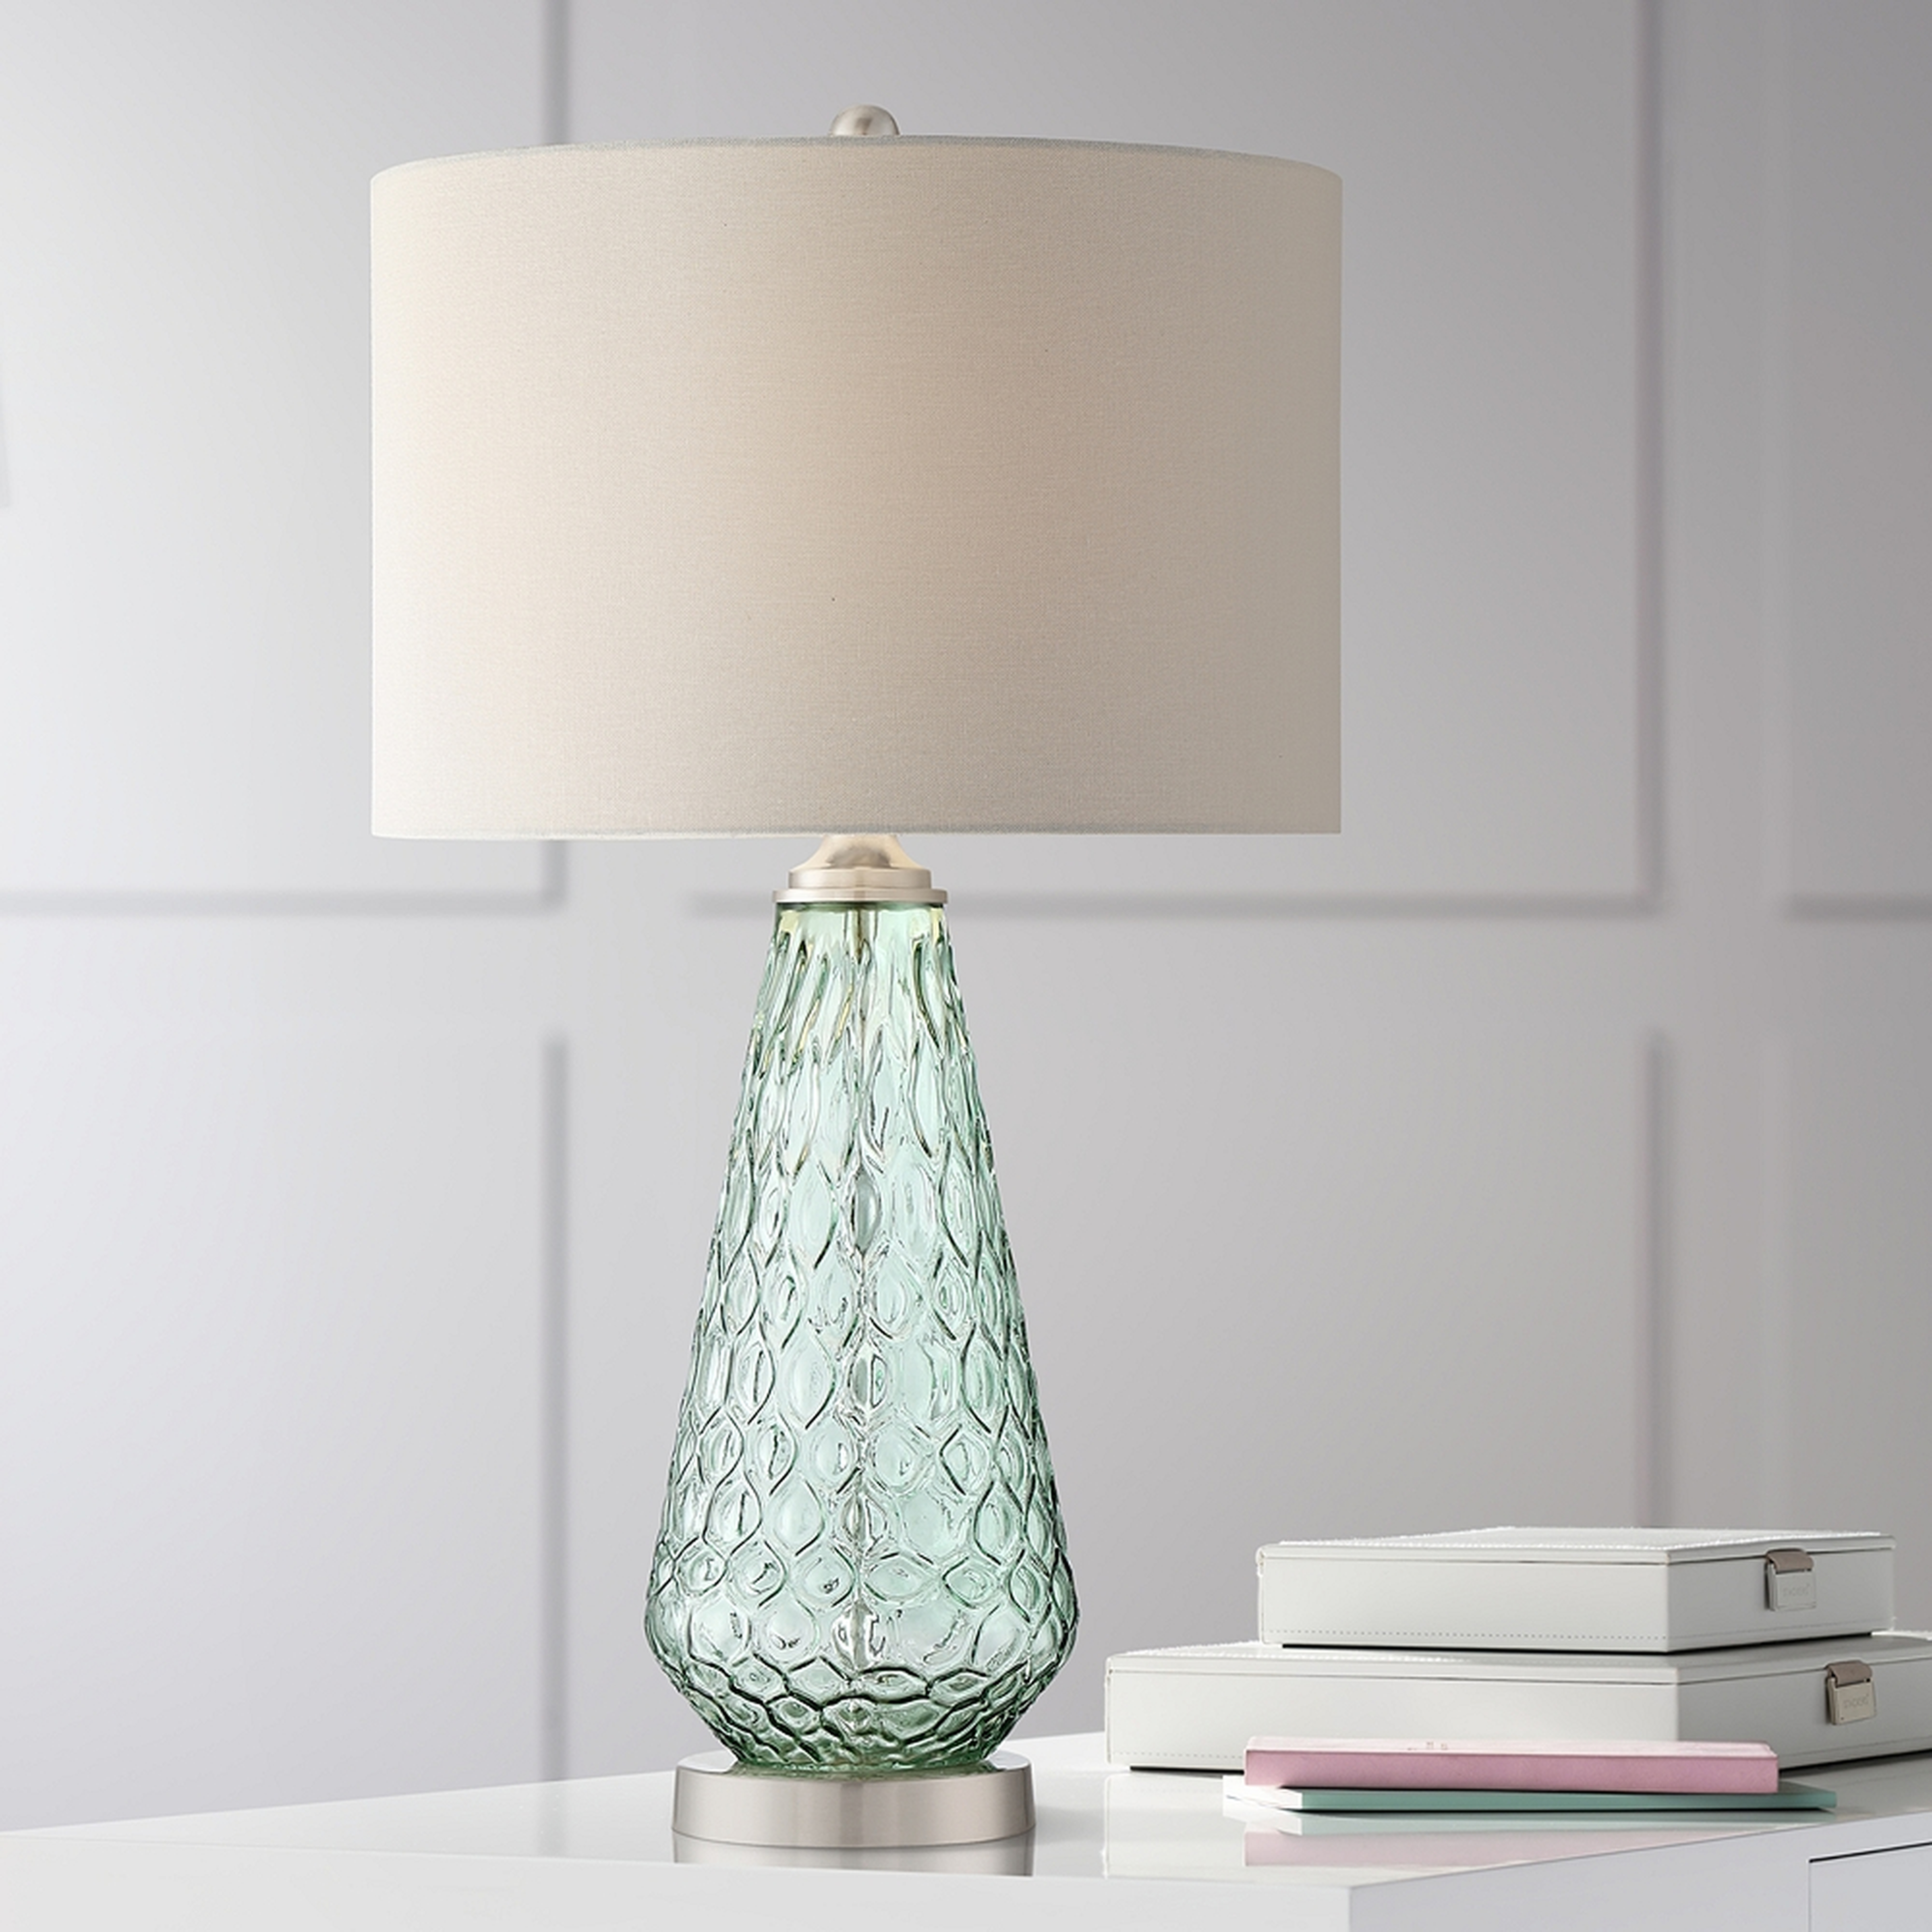 Julia Seafoam Green Glass Table Lamp with Table Top Dimmer - Style # 89K67 - Lamps Plus